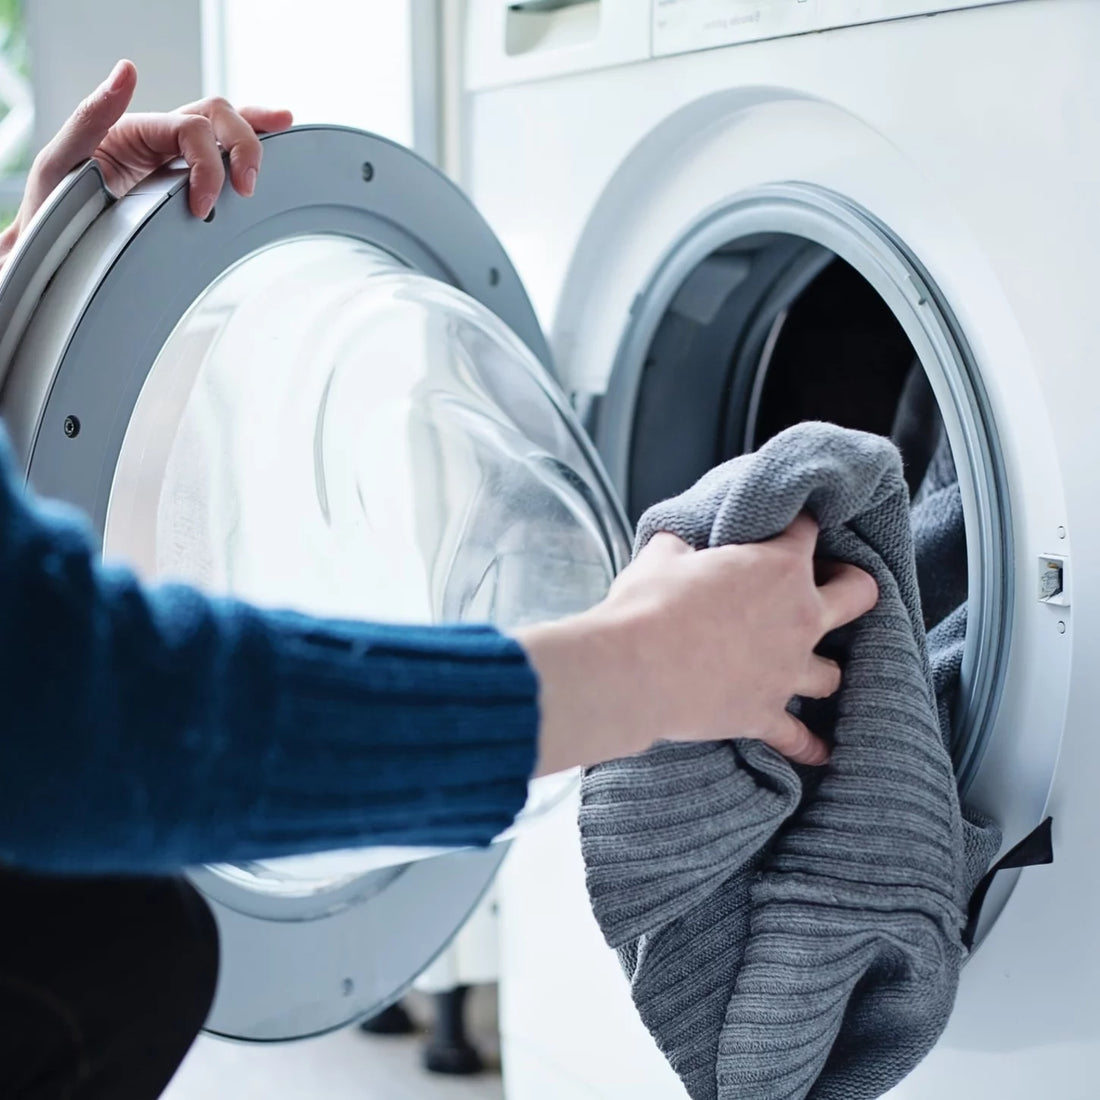 Cleaning a Washer - A Must Or a Joke?